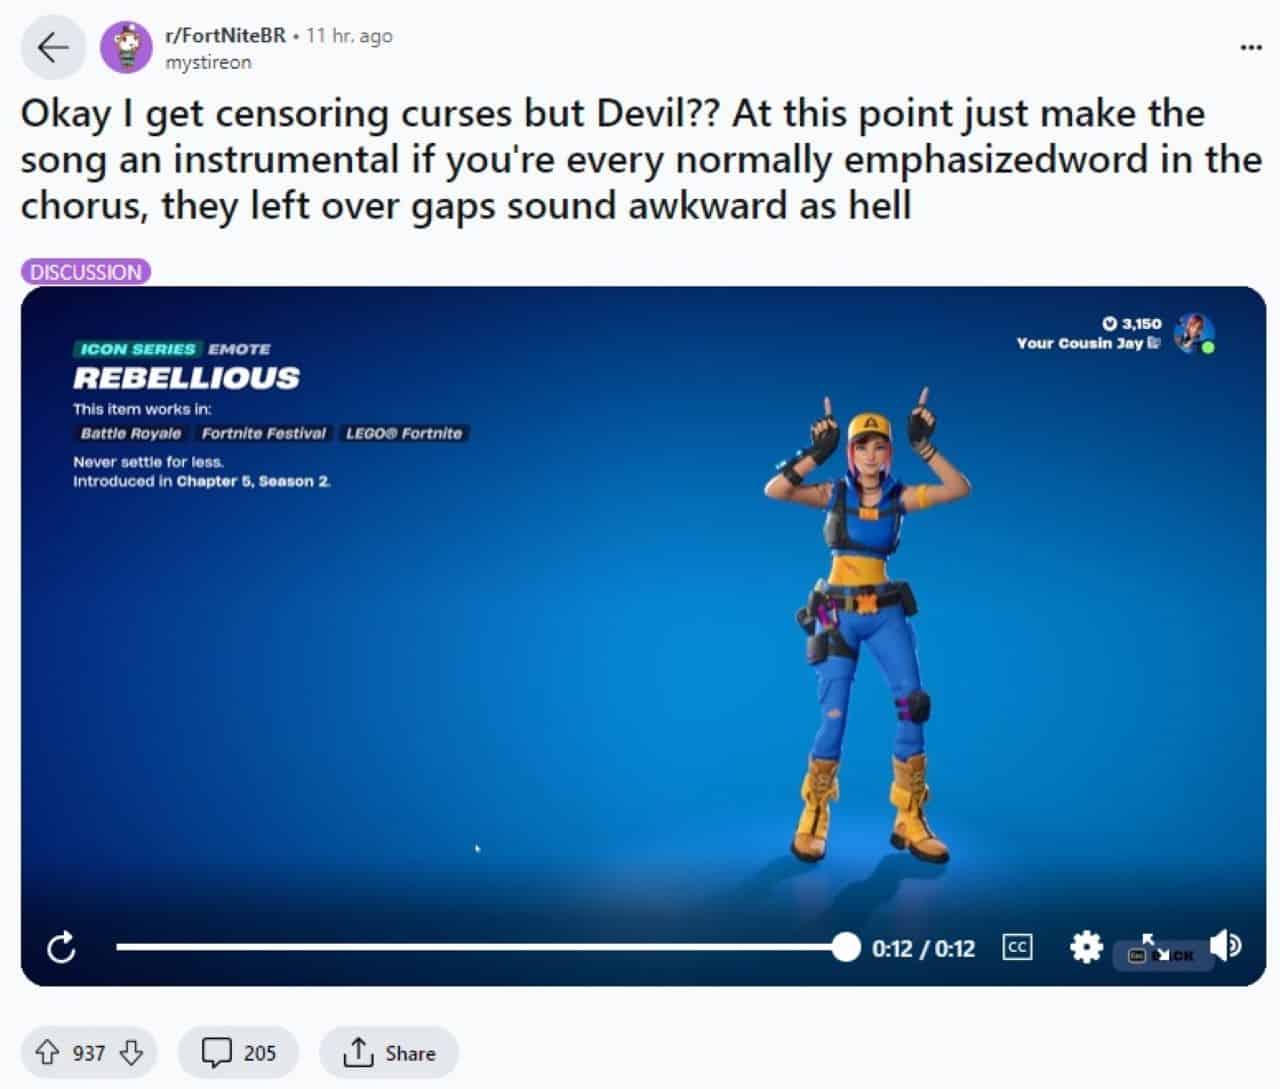 Screenshot of a reddit post discussing the latest Fortnite criticism about a character cursing, quickly shut down by Epic with a video of the character in-game, accompanied by text and user reactions.